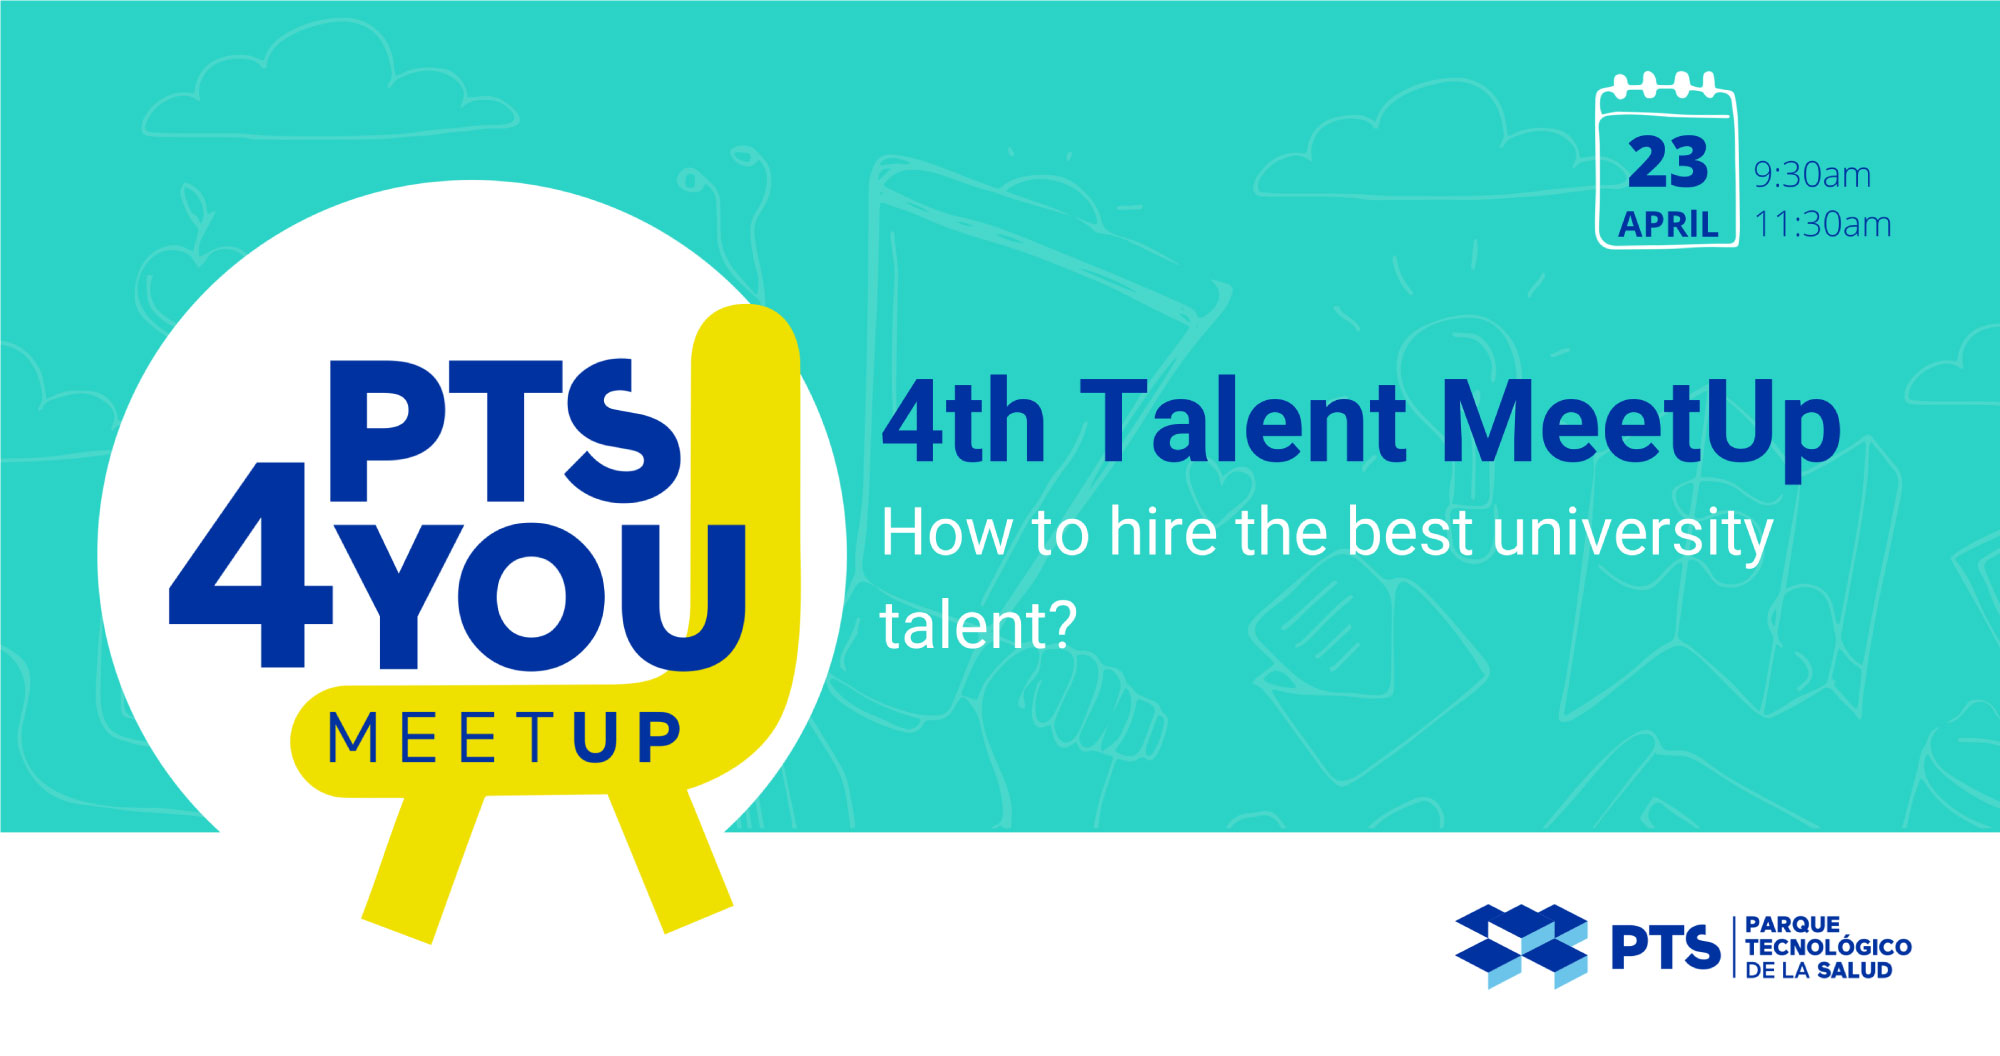 Featured image for “4th Talent MeetUp”